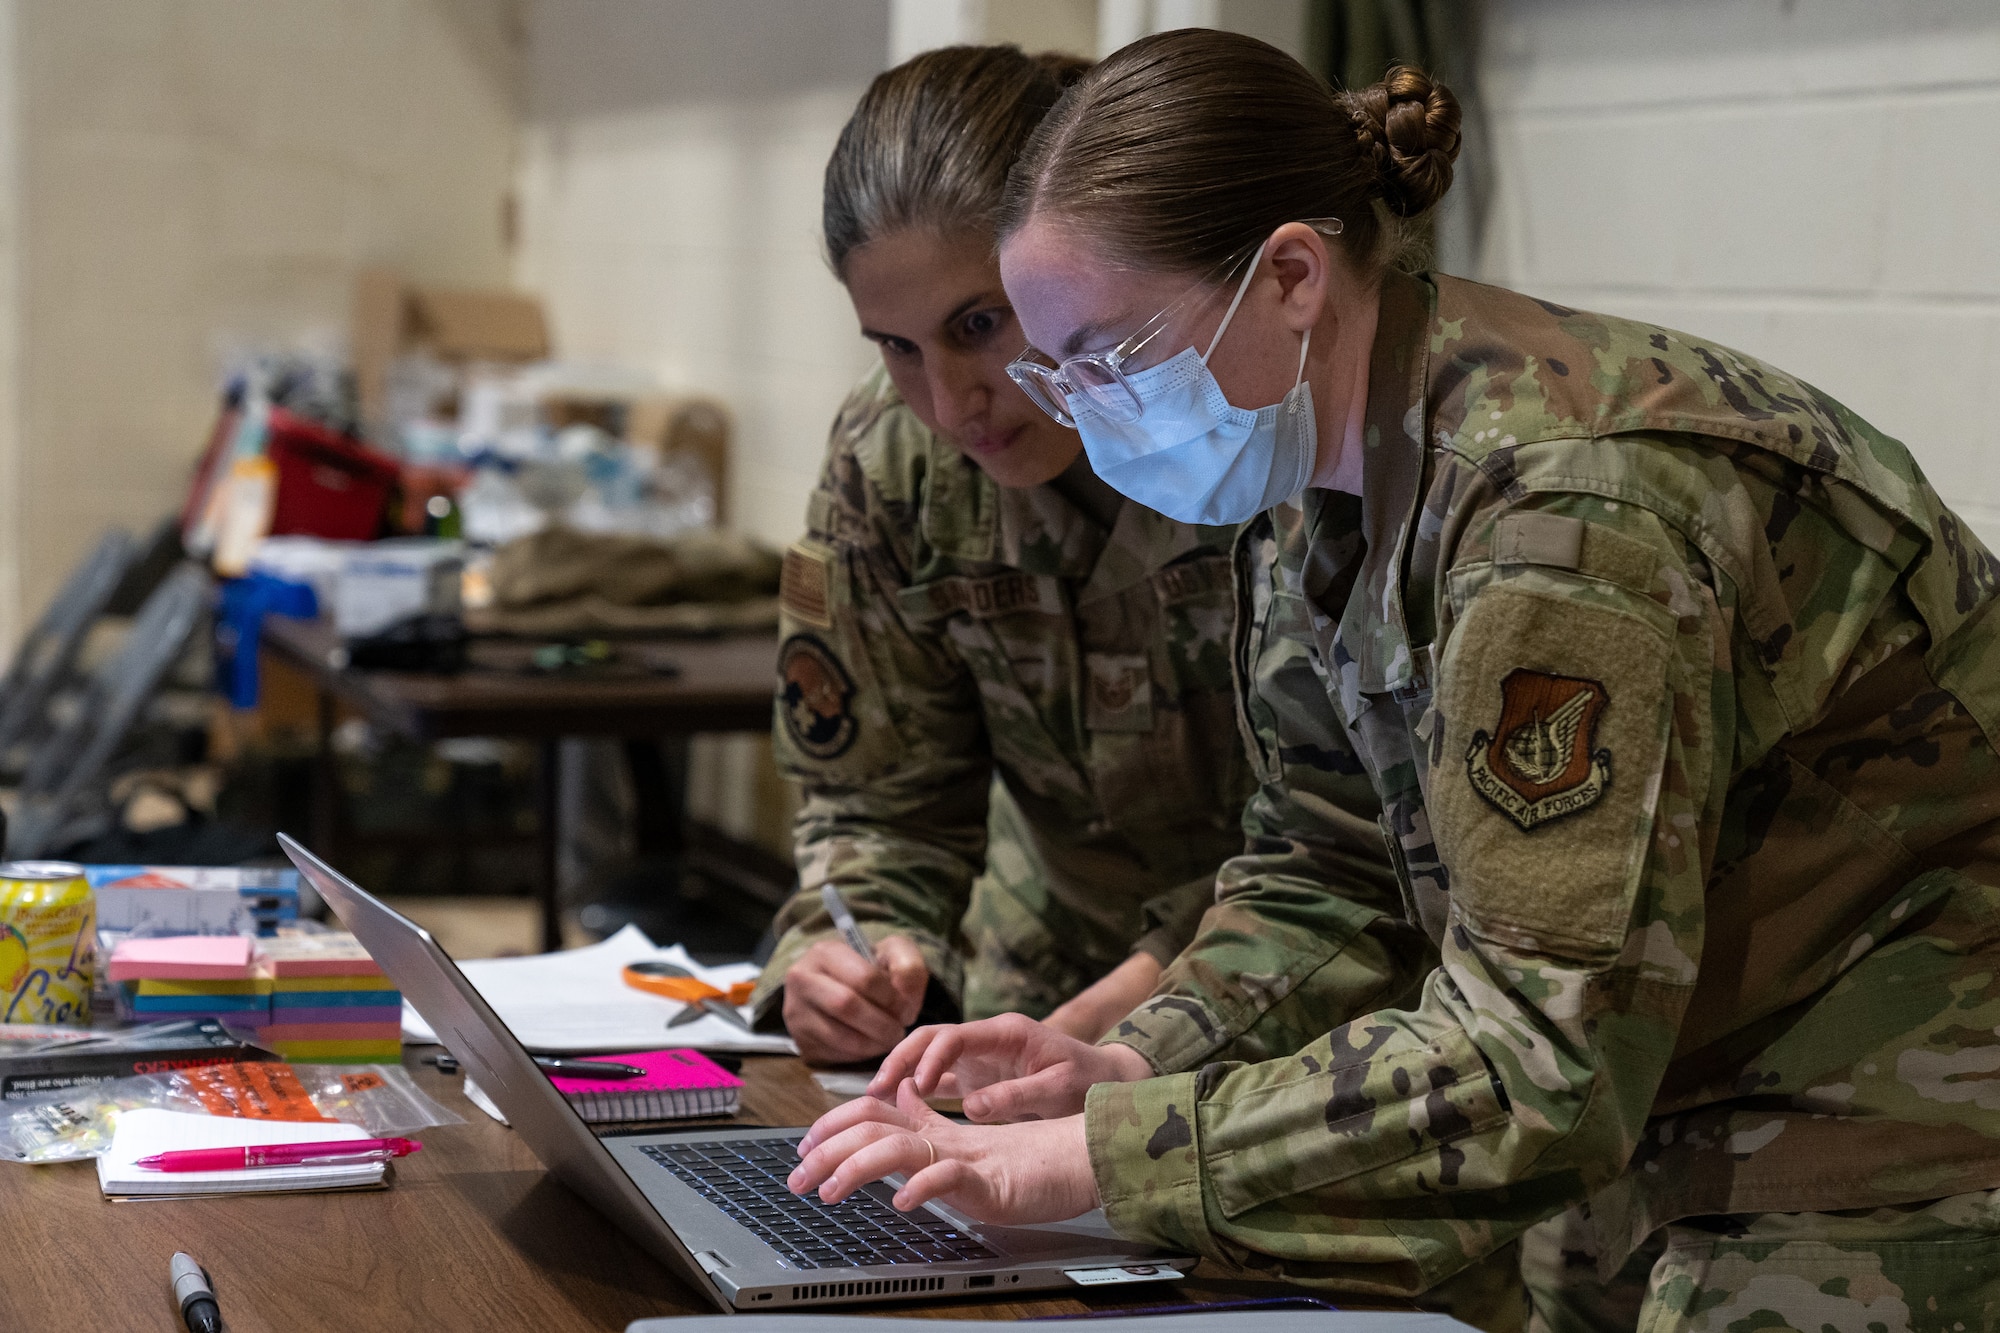 U.S. Air Force Staff Sgt. Zoie King leans over a computer typing while Tech. Sgt. Alexandra Sanders leans over next to her also looking at the computer screen